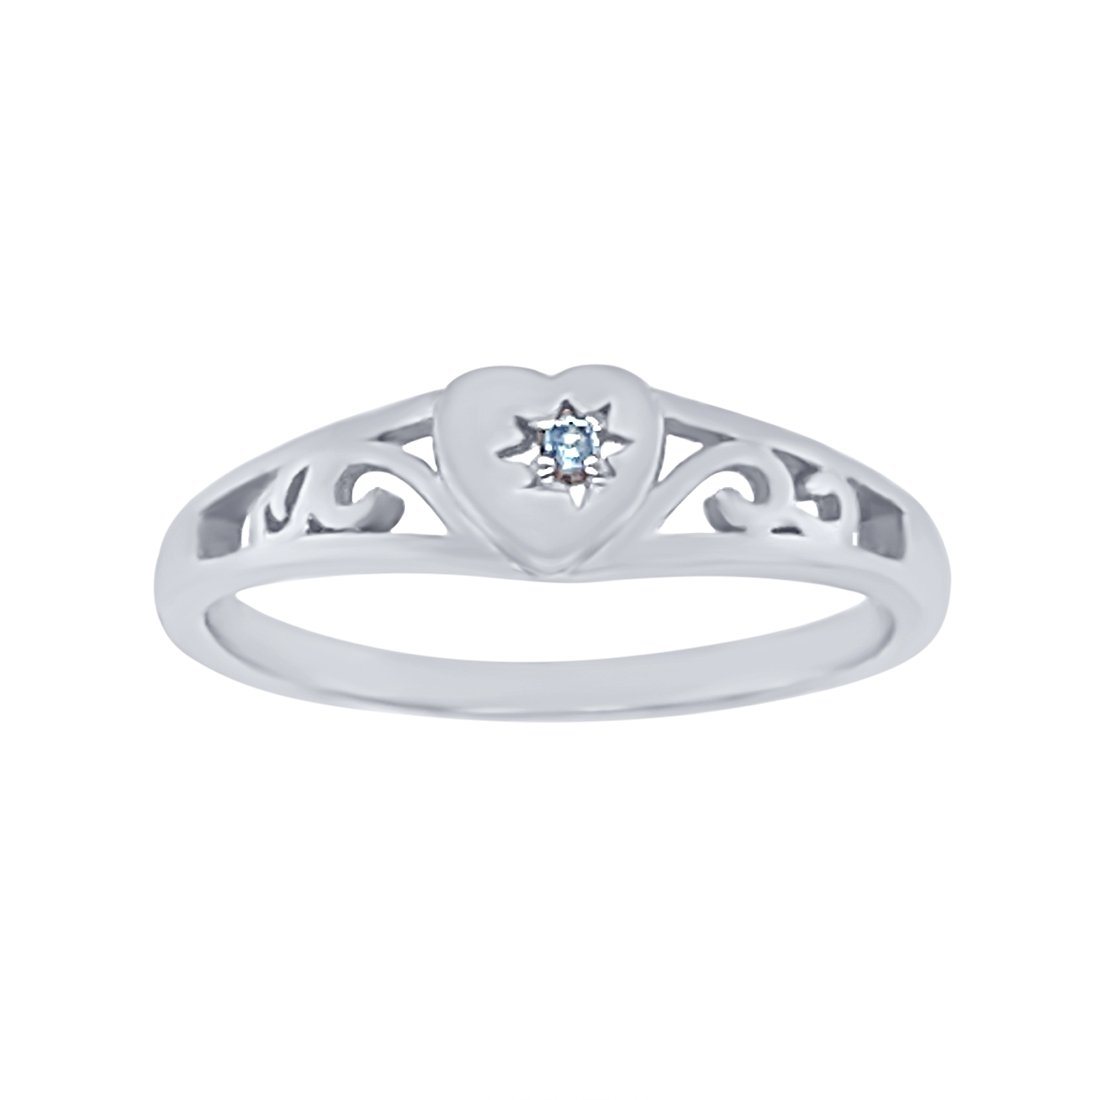 Sterling Silver Heart Signet Ring with Aquamarine Rings Bevilles 